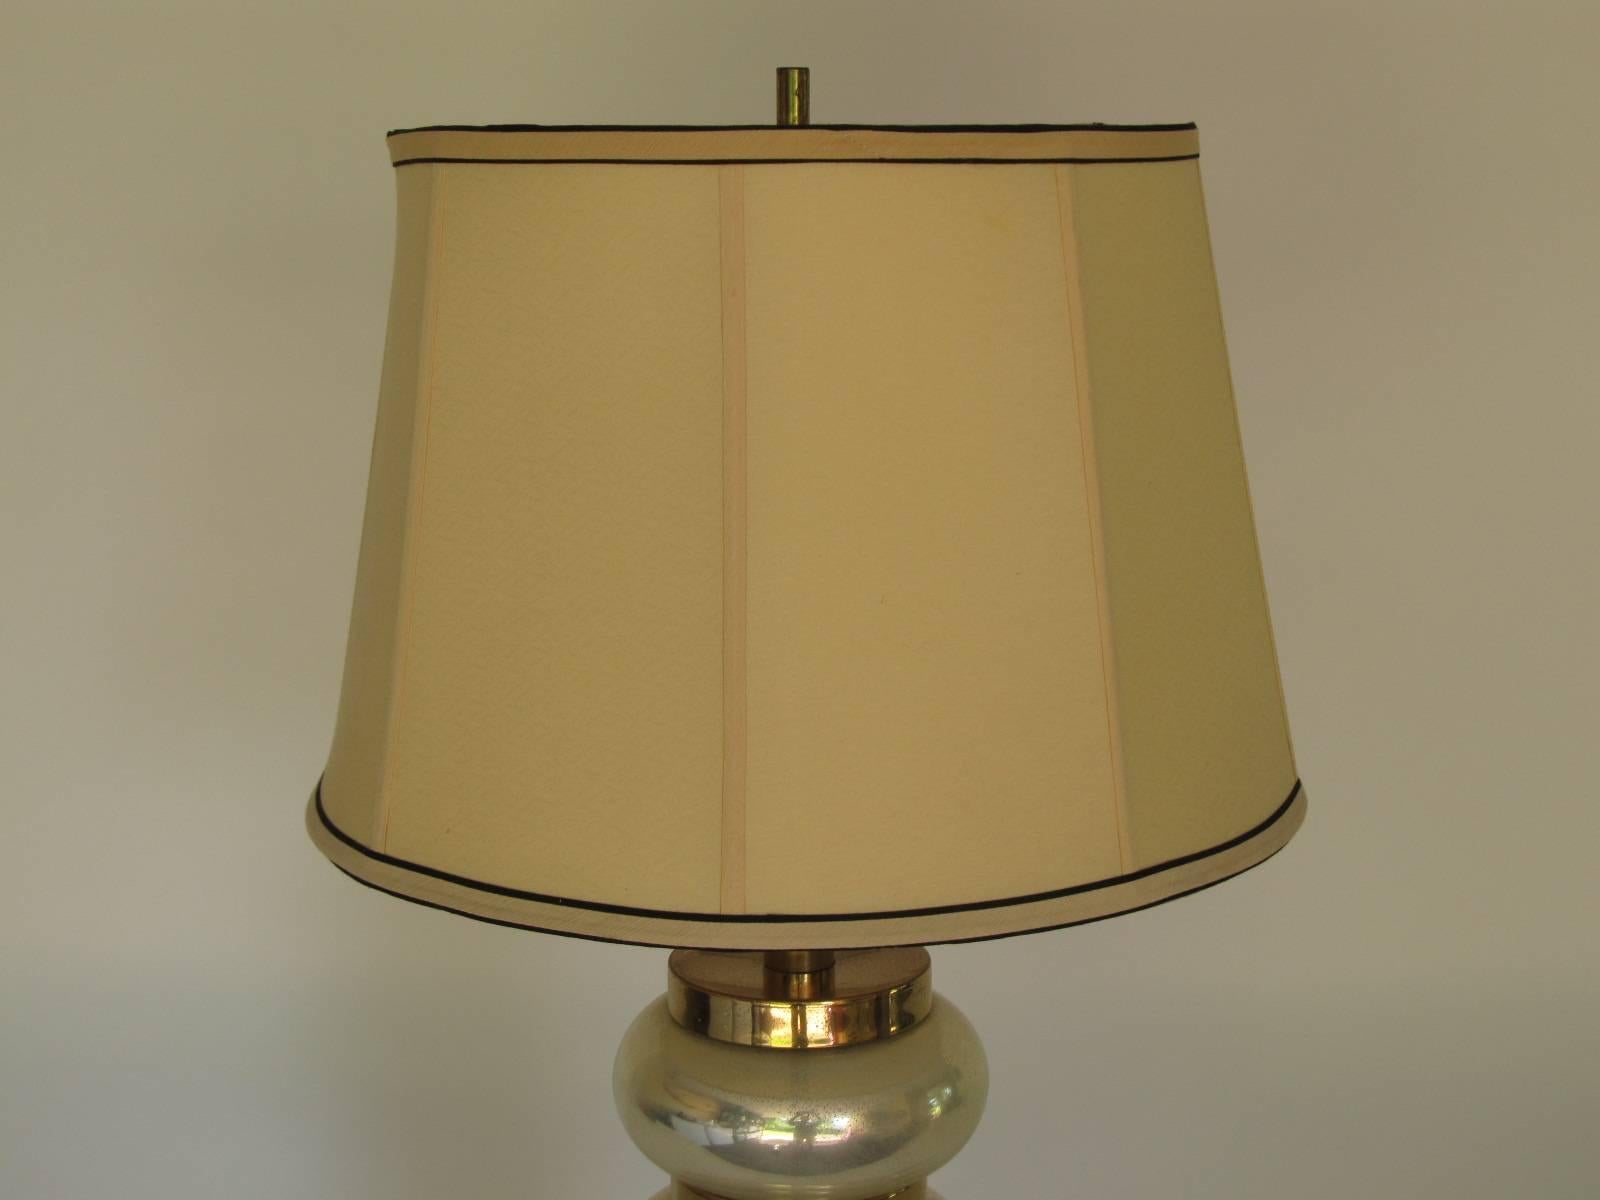 1940s, Mirrored Glass and Brass Table Lamp In Distressed Condition For Sale In Papaikou, HI